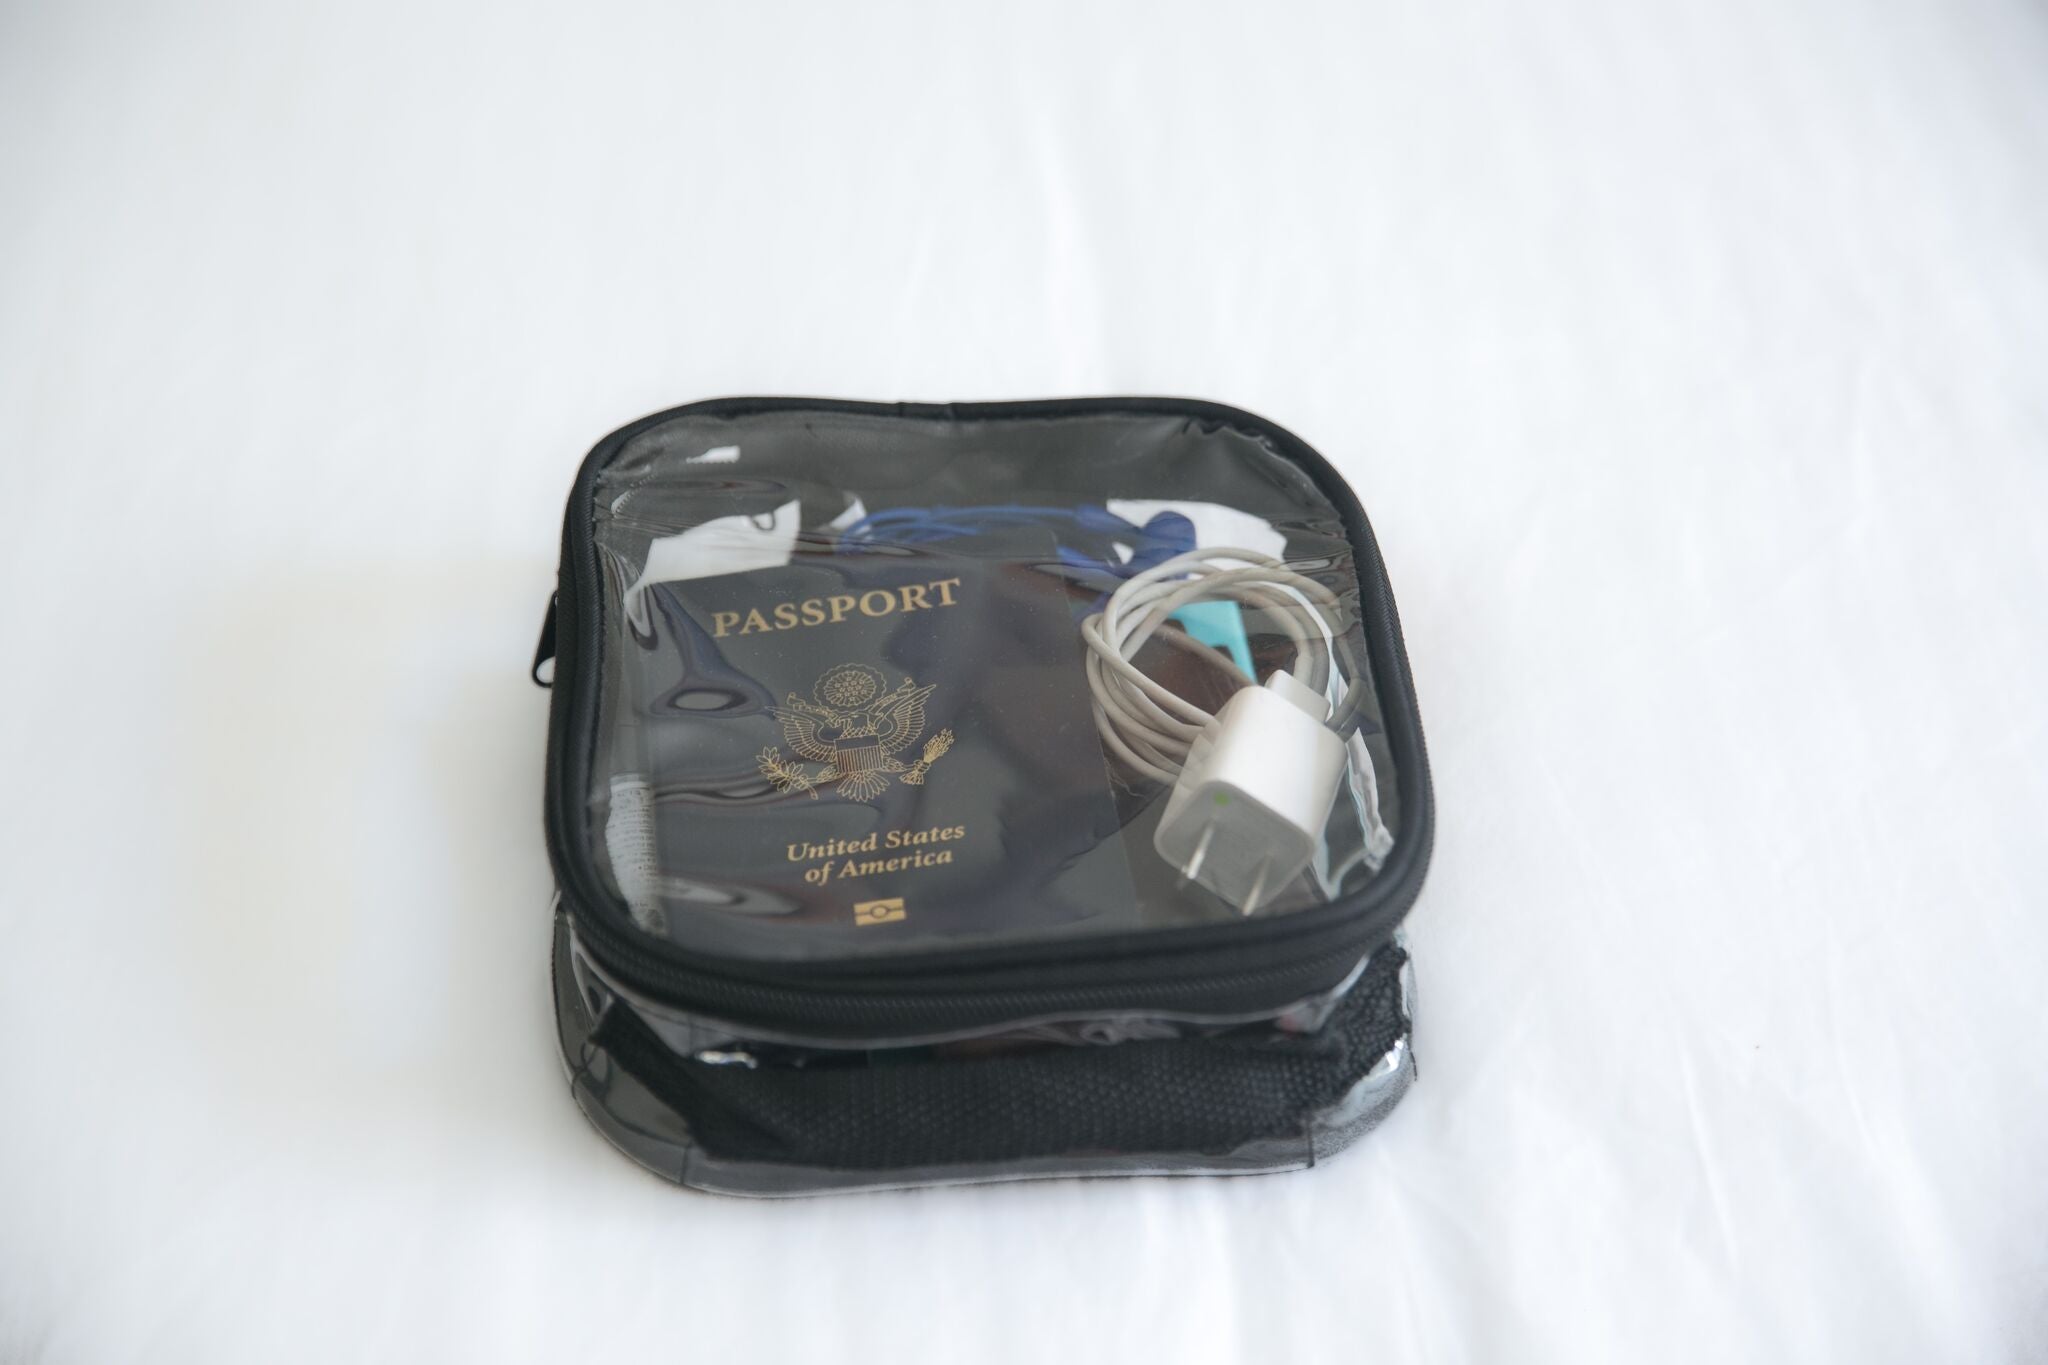 ezpacking extra small cube as travel cord organizer